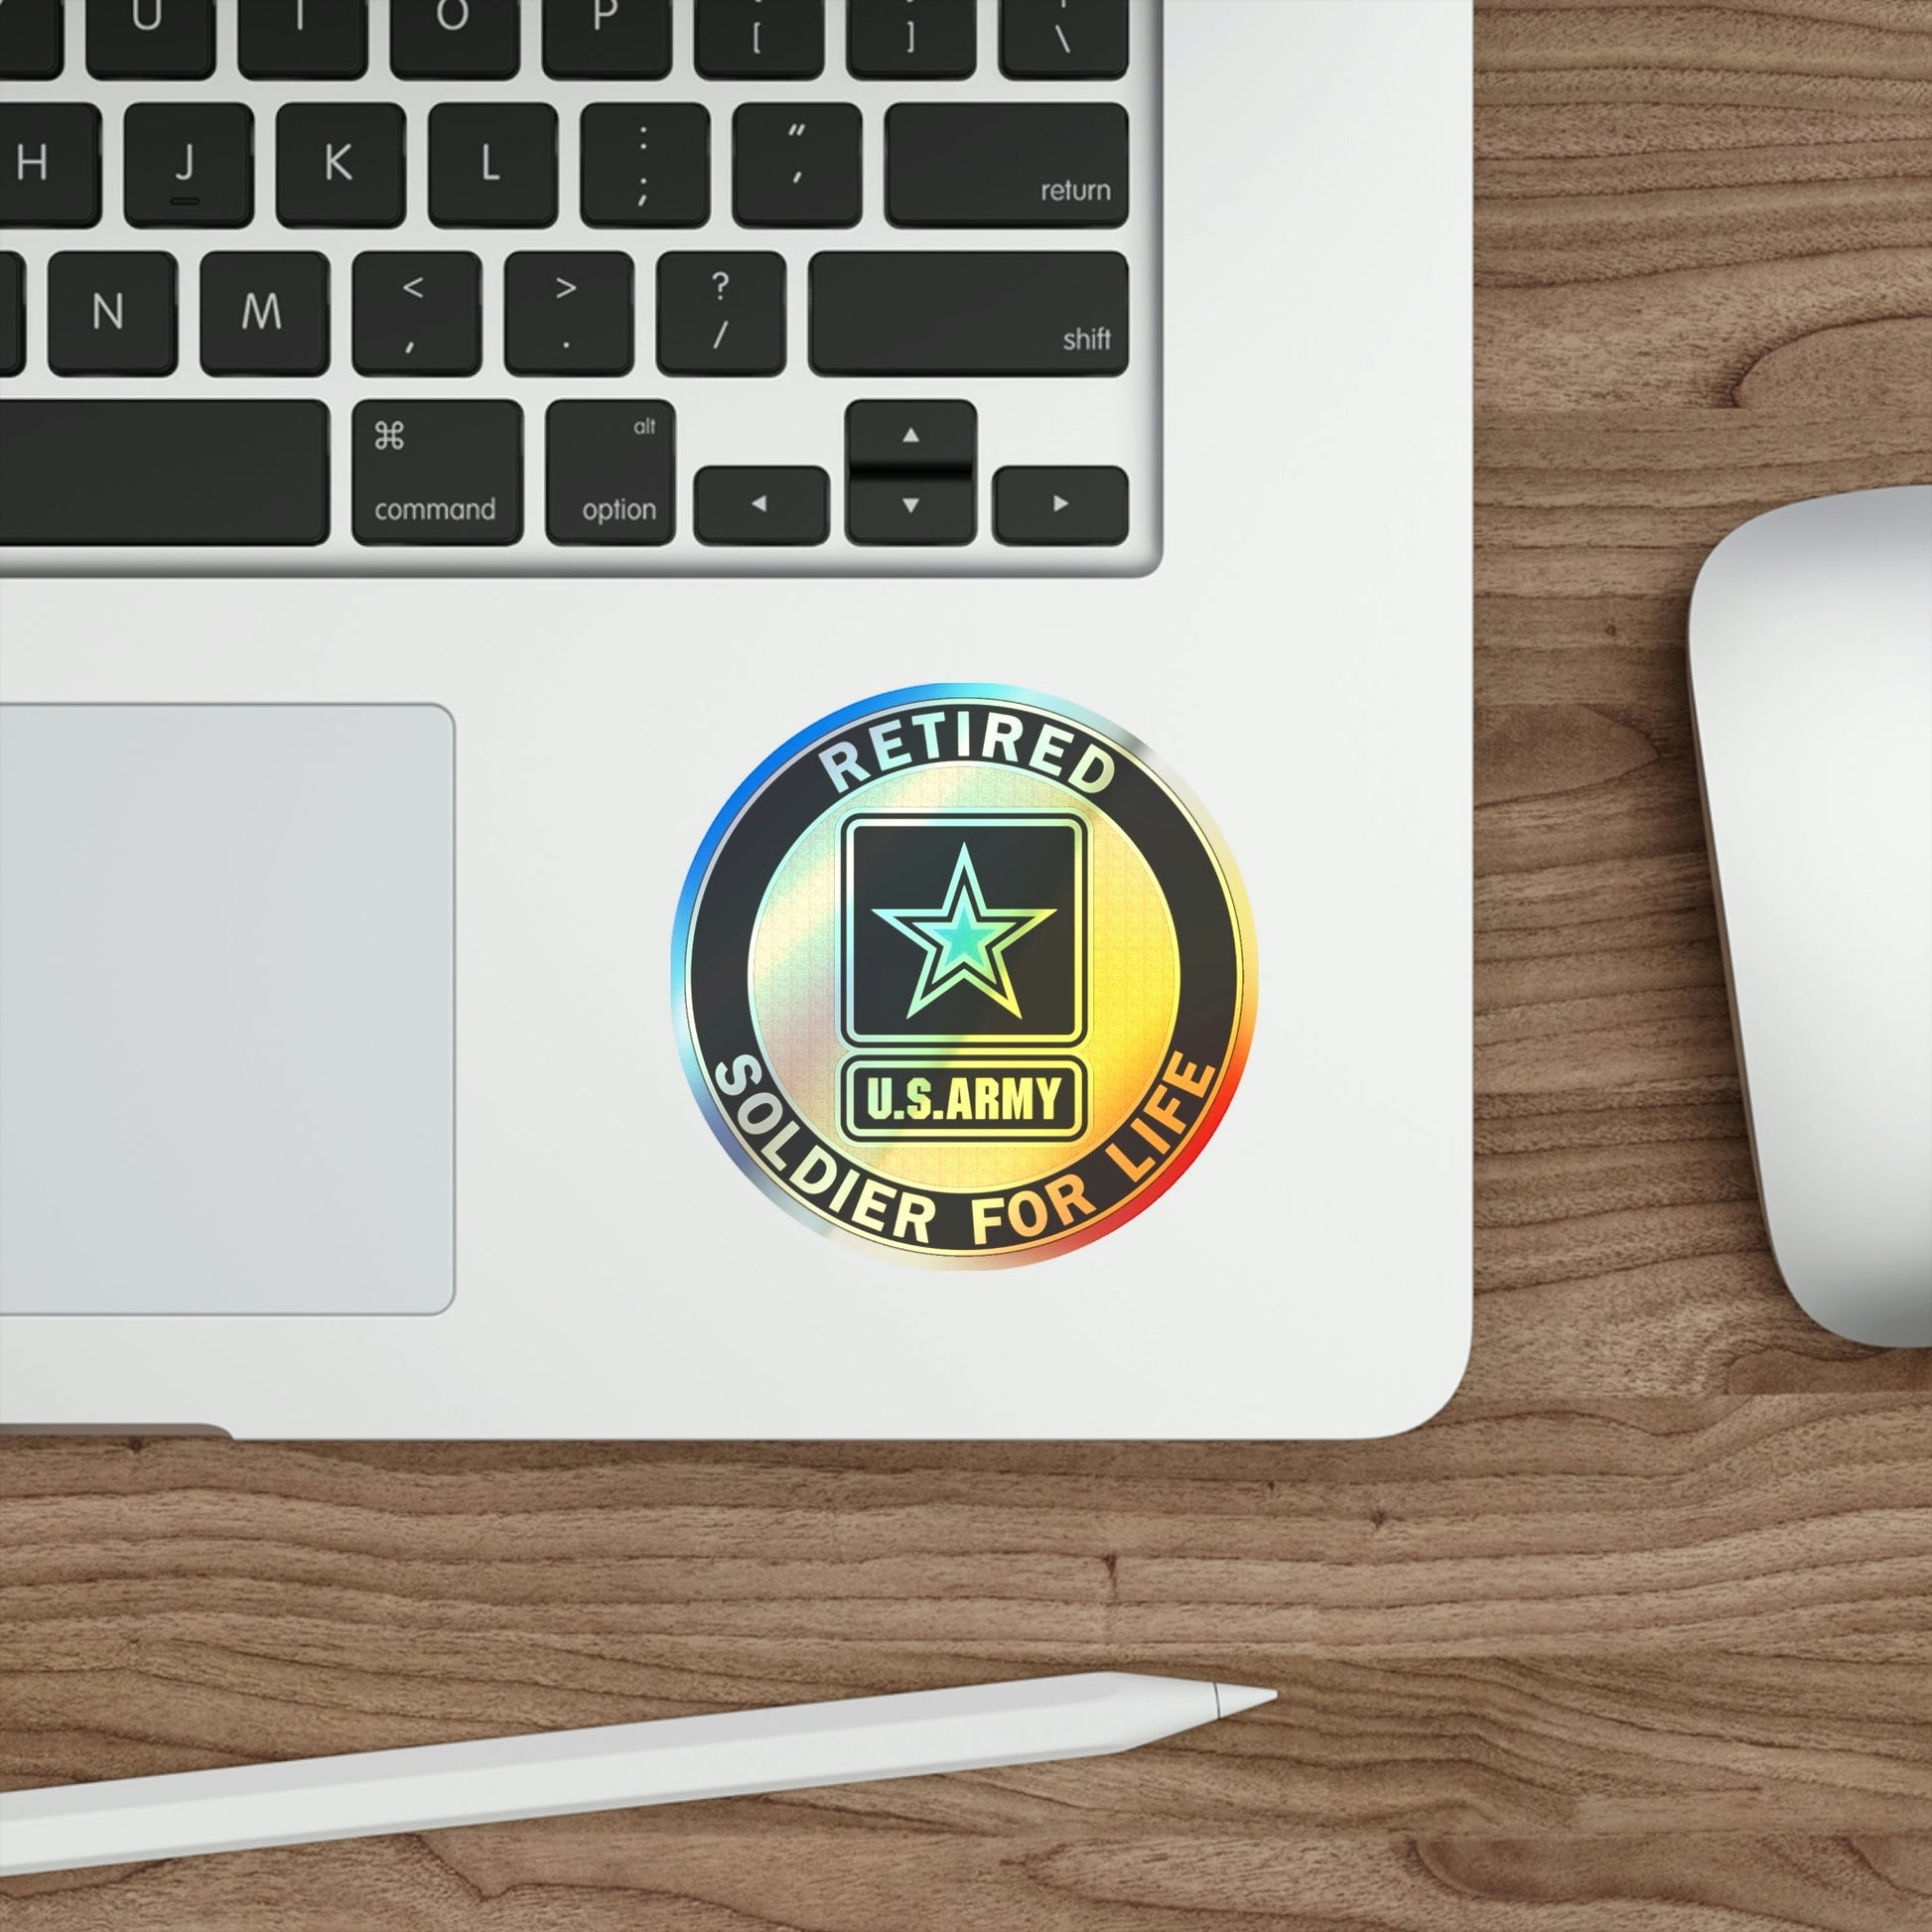 Retired Service Identification Badge (U.S. Army) Holographic STICKER Die-Cut Vinyl Decal-The Sticker Space